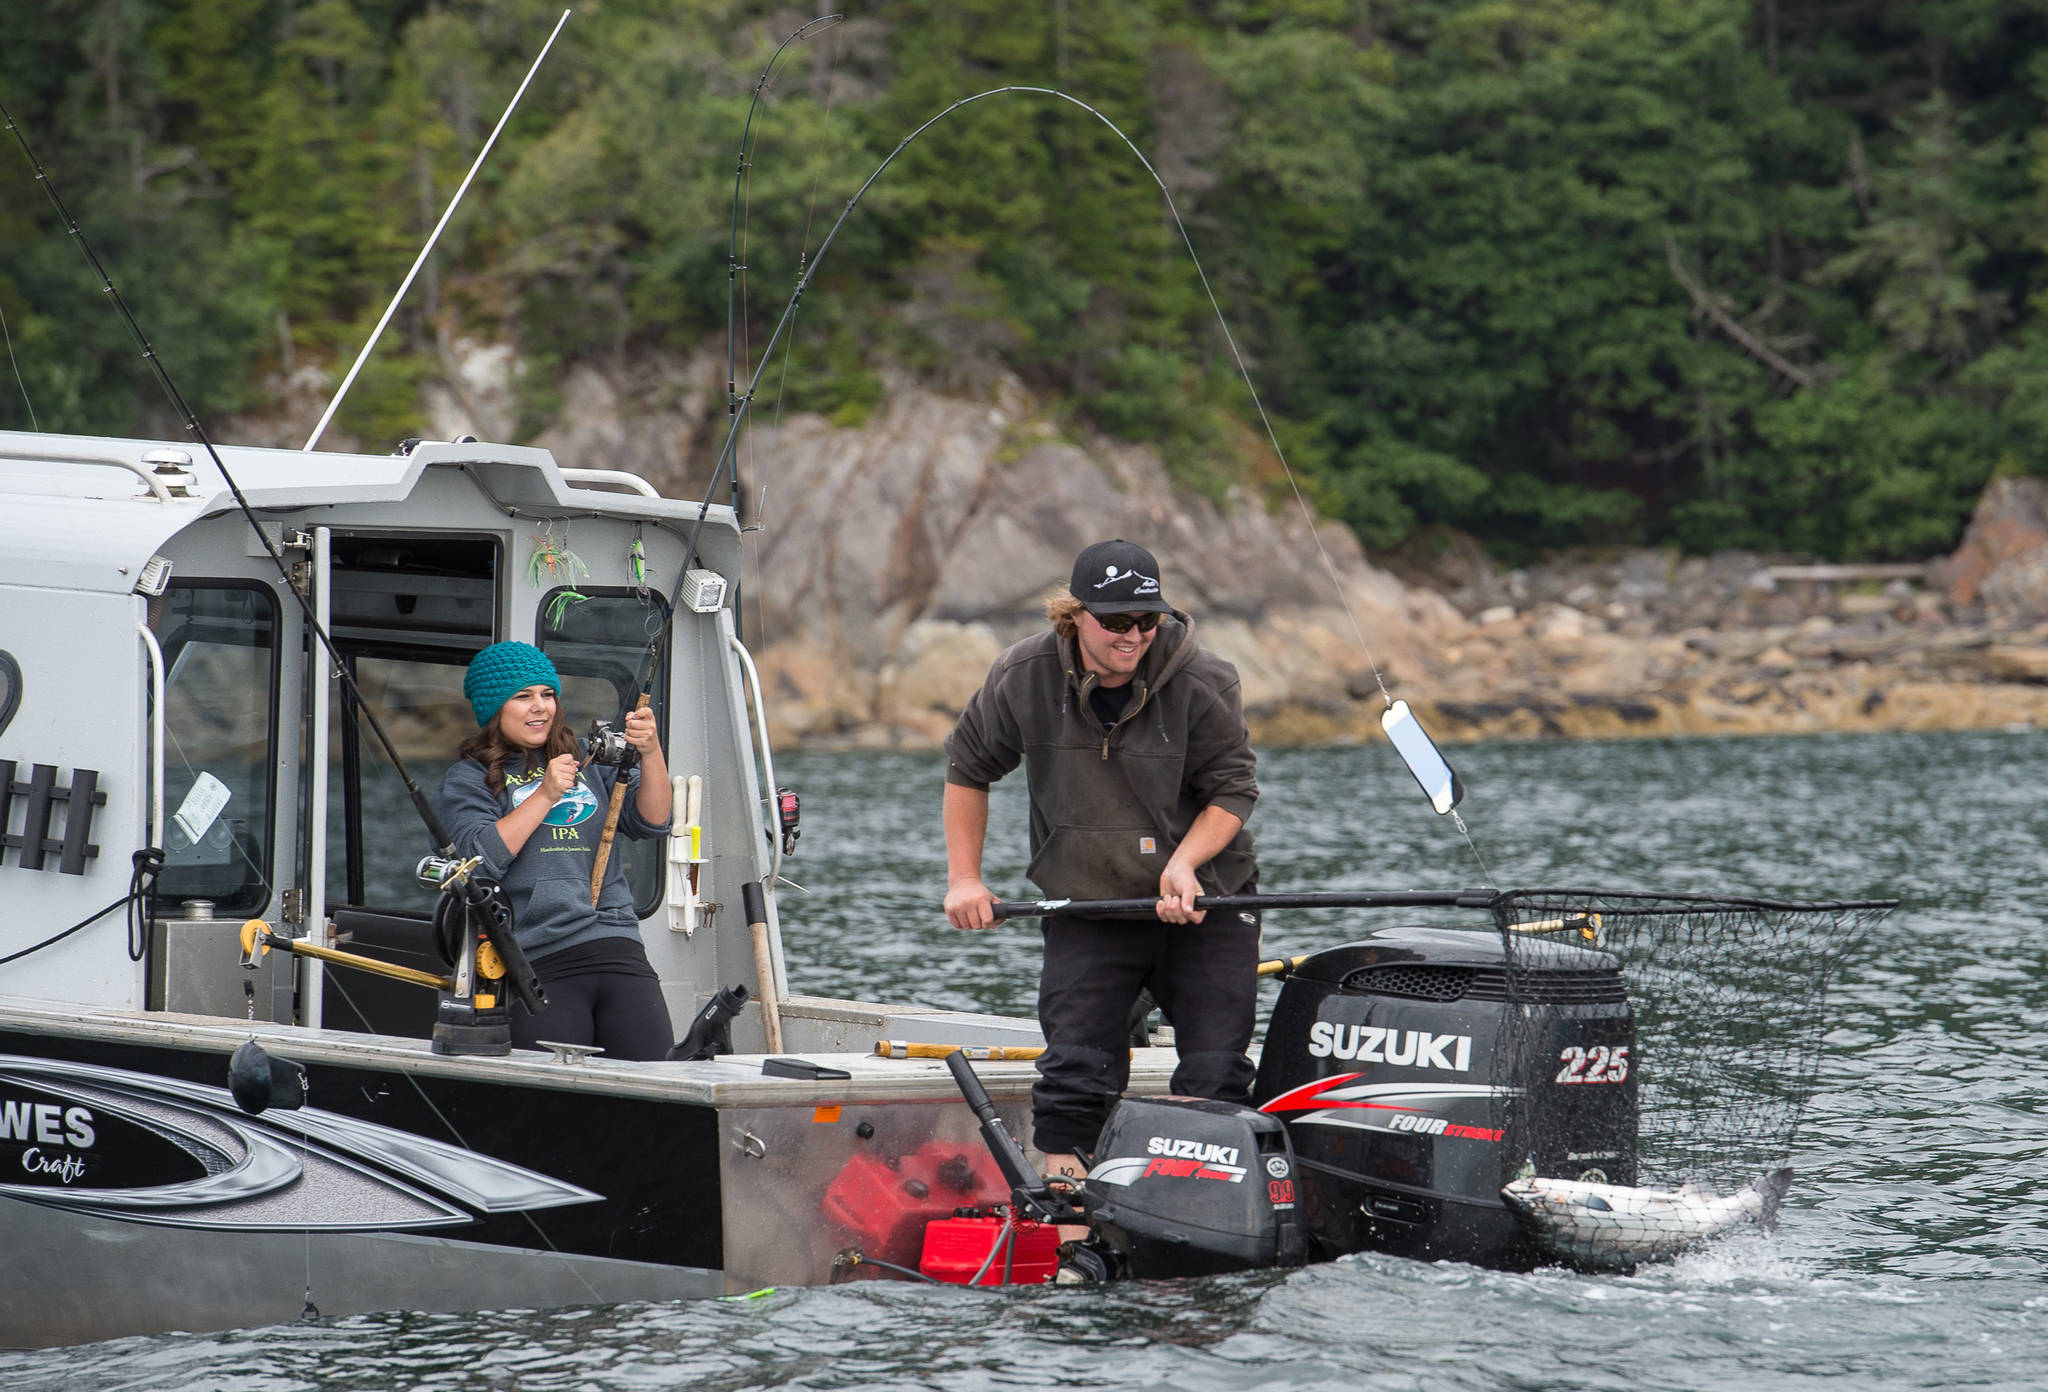 Dylan Kubley and Abbey Wilwert bring in a silver salmon during in the 71st Annual Golden North Salmon Derby on Friday, August 11, 2017. (Michael Penn | Juneau Empire)